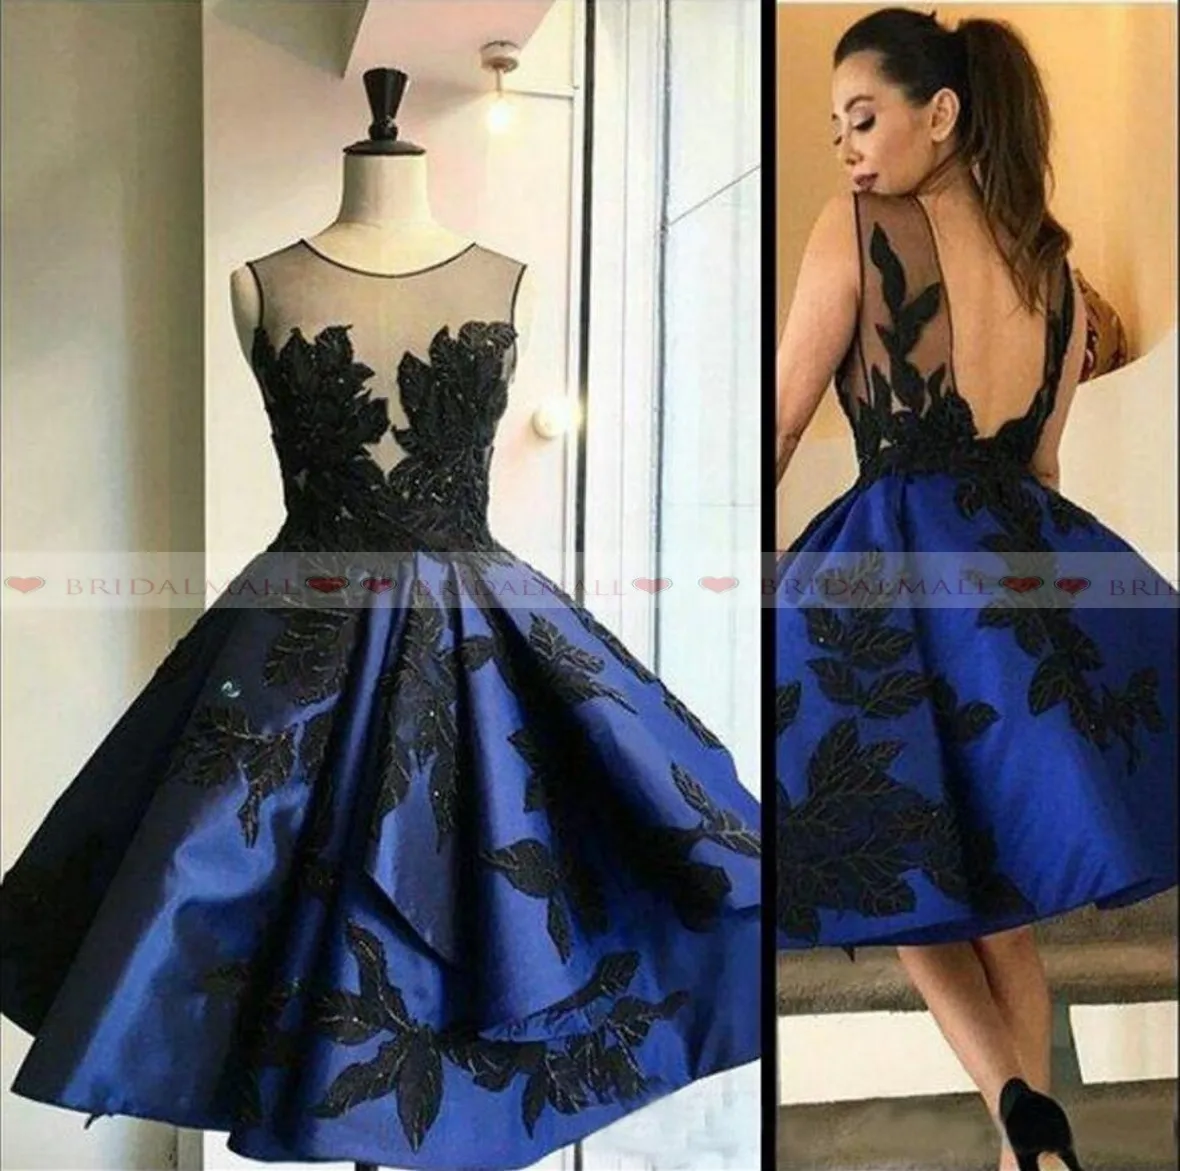 Chic 2020 Royal Blue Short Homecoming Dresses Sheer Neck Appliqued Satin Prom Dress 8th Gilrls Graduation Sexy Backless Cocktail Party Gowns